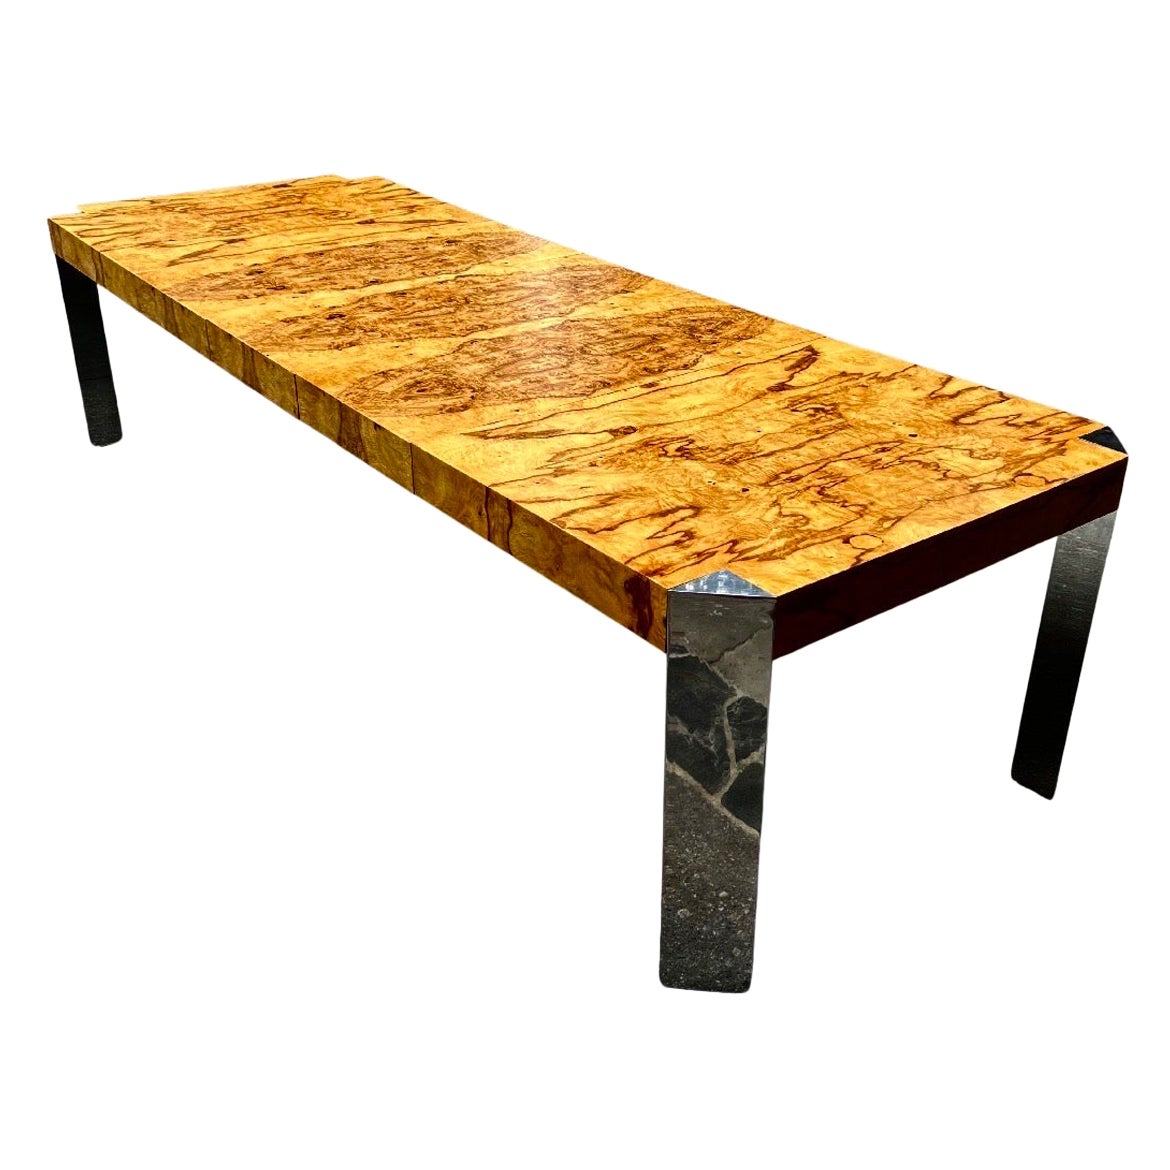 Spectacular Olivewood Butterfly Patterned Dining Table by Sprunger for Dunbar